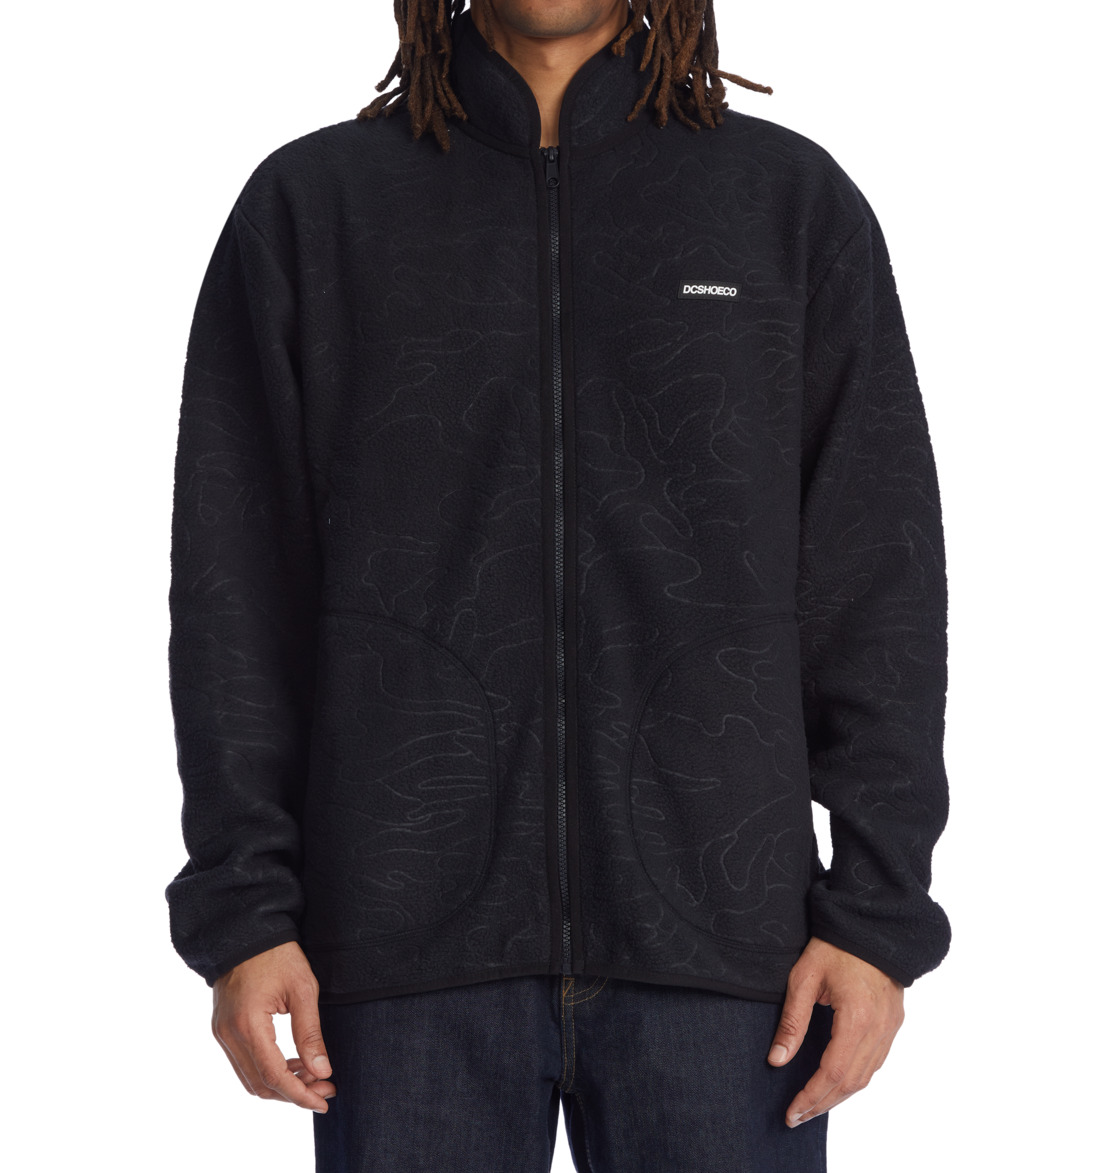 DC Shoes Fleecepullover »Outsider« von DC Shoes